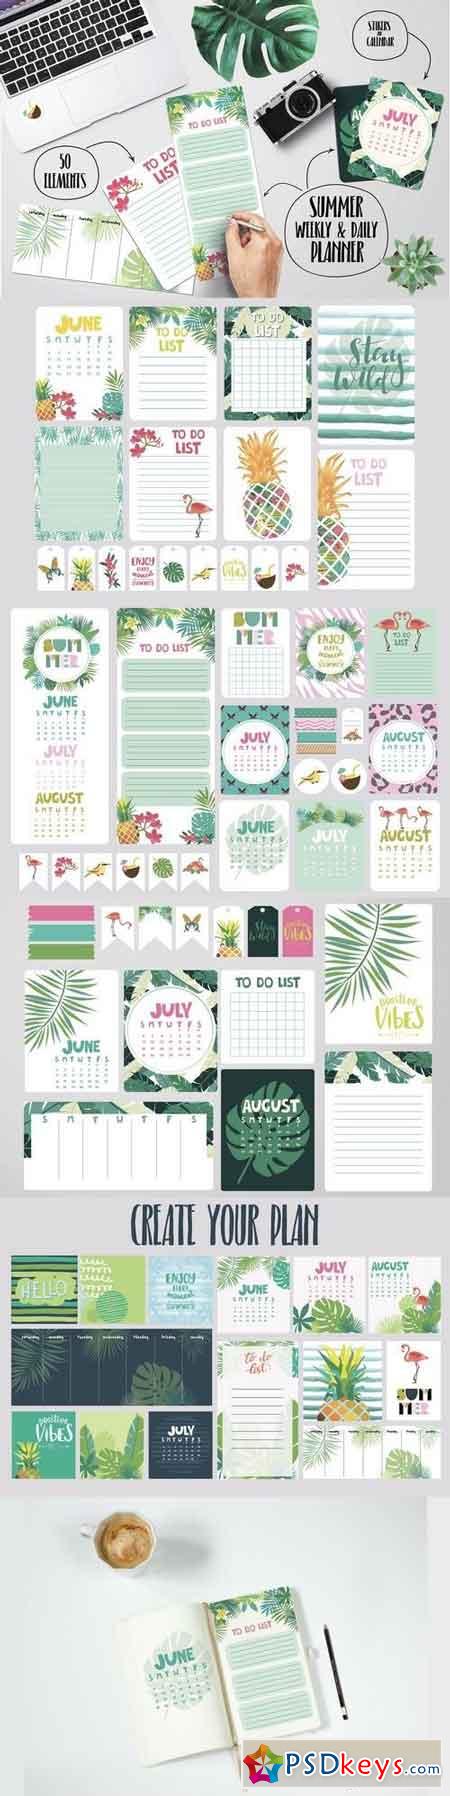 Weekly and daily summer planner 1392208